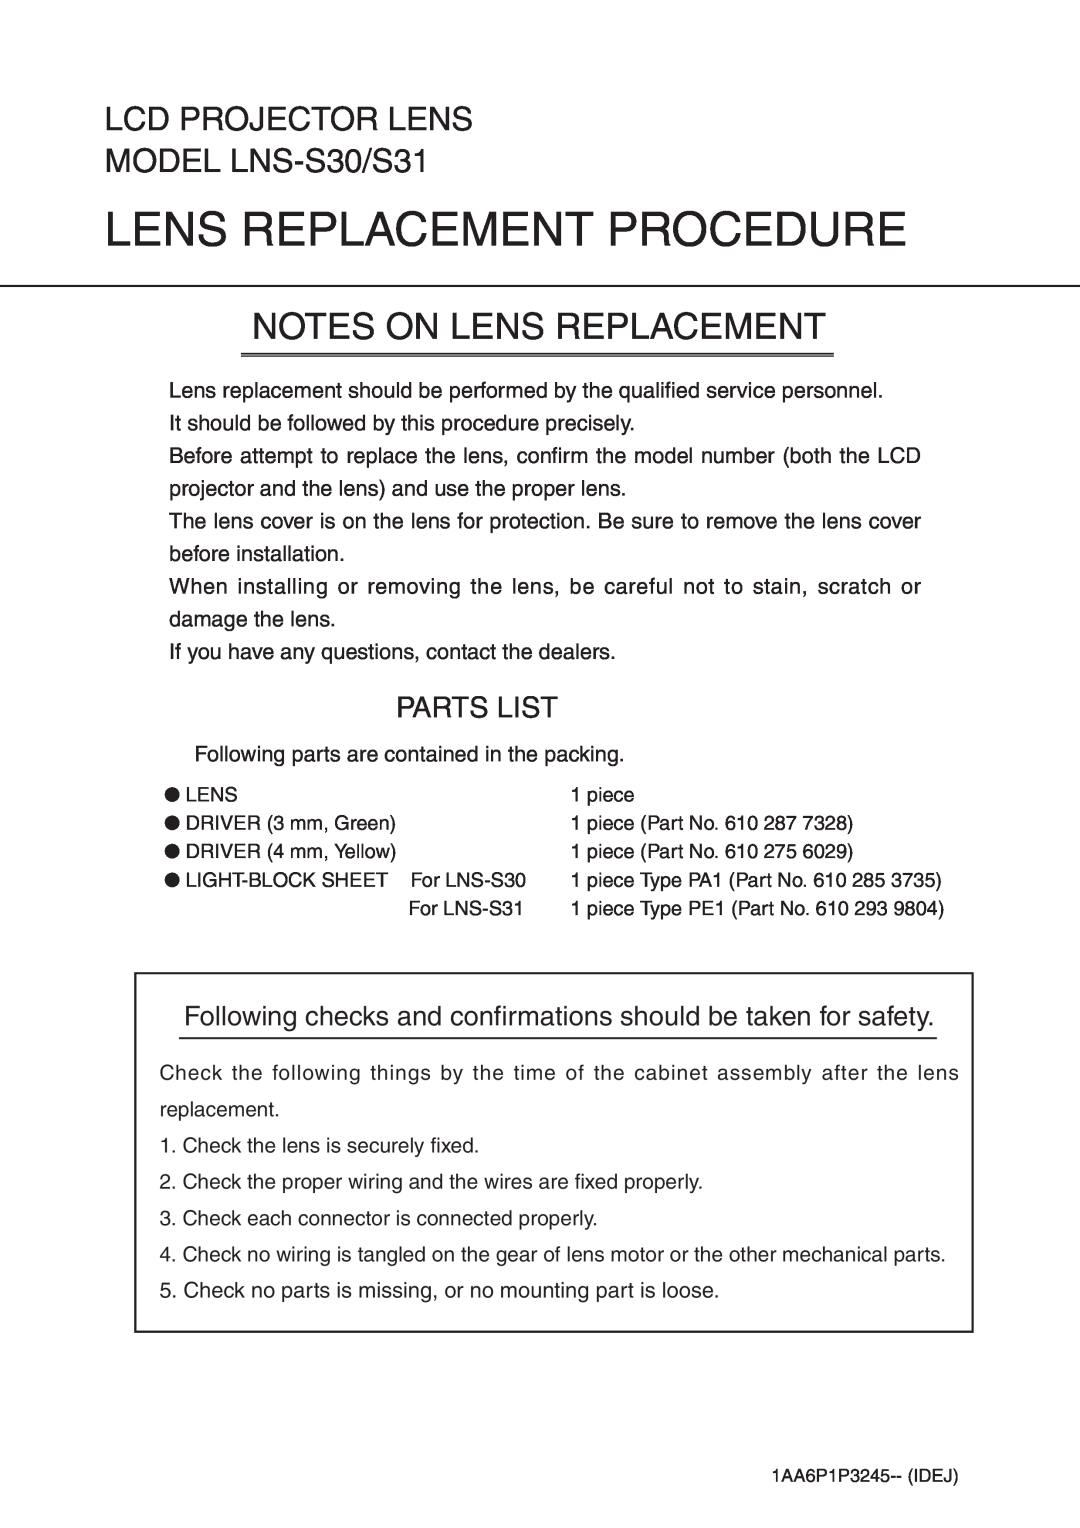 Sanyo LNS-S30 manual Parts List, Following checks and confirmations should be taken for safety, Lens Replacement Procedure 